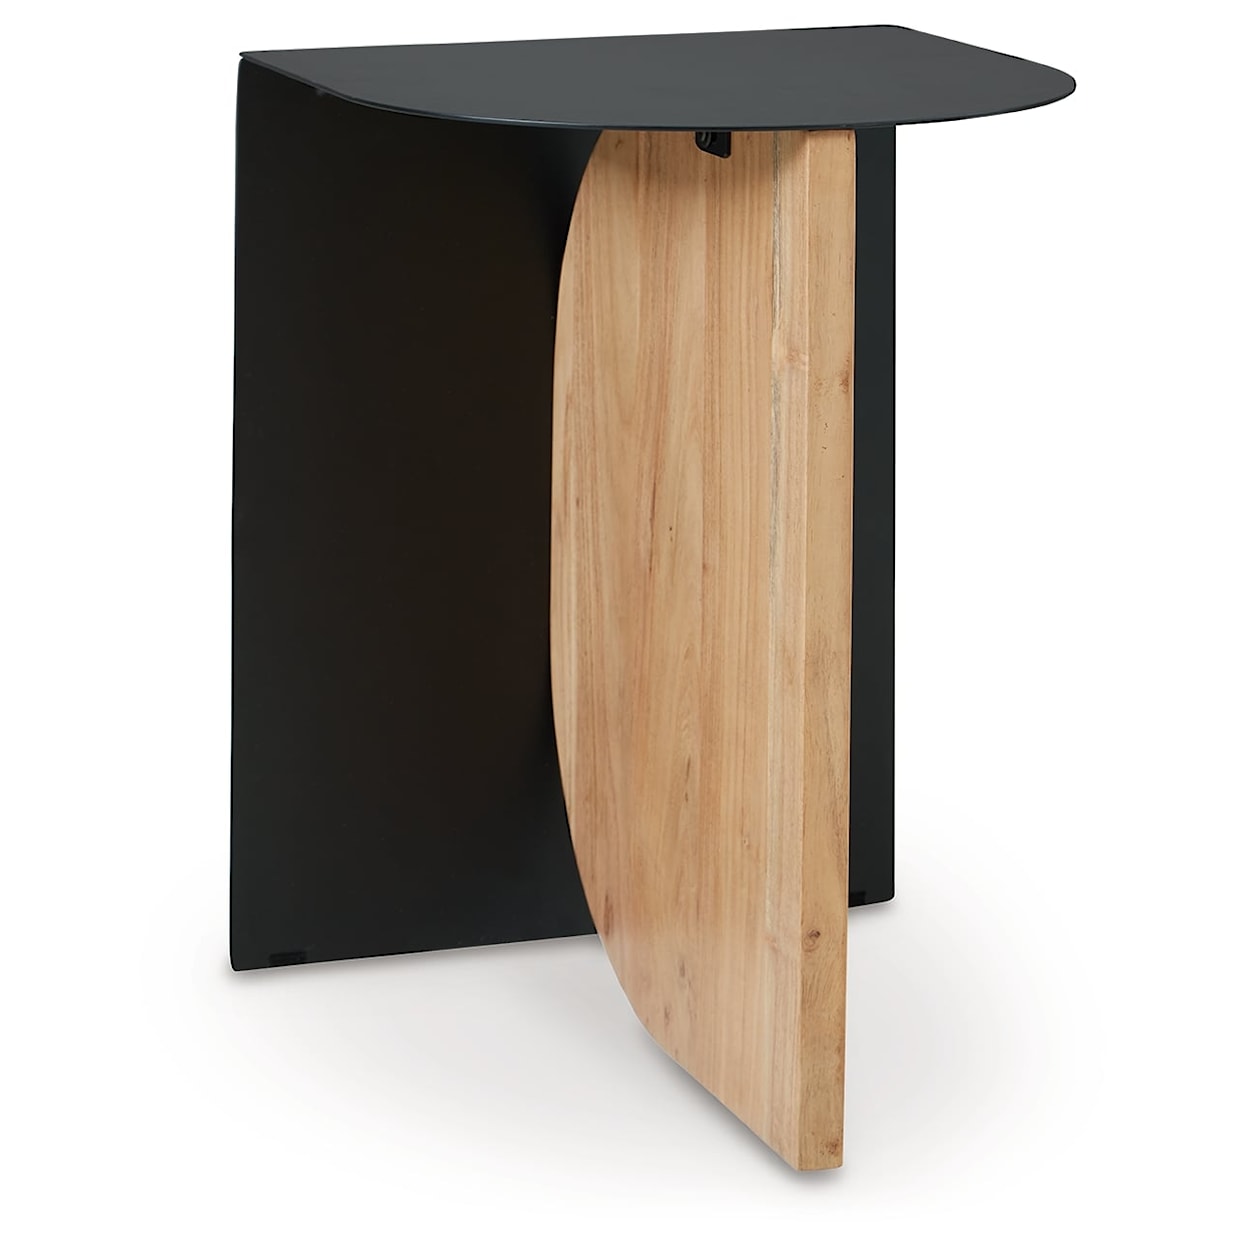 Benchcraft Ladgate Accent Table